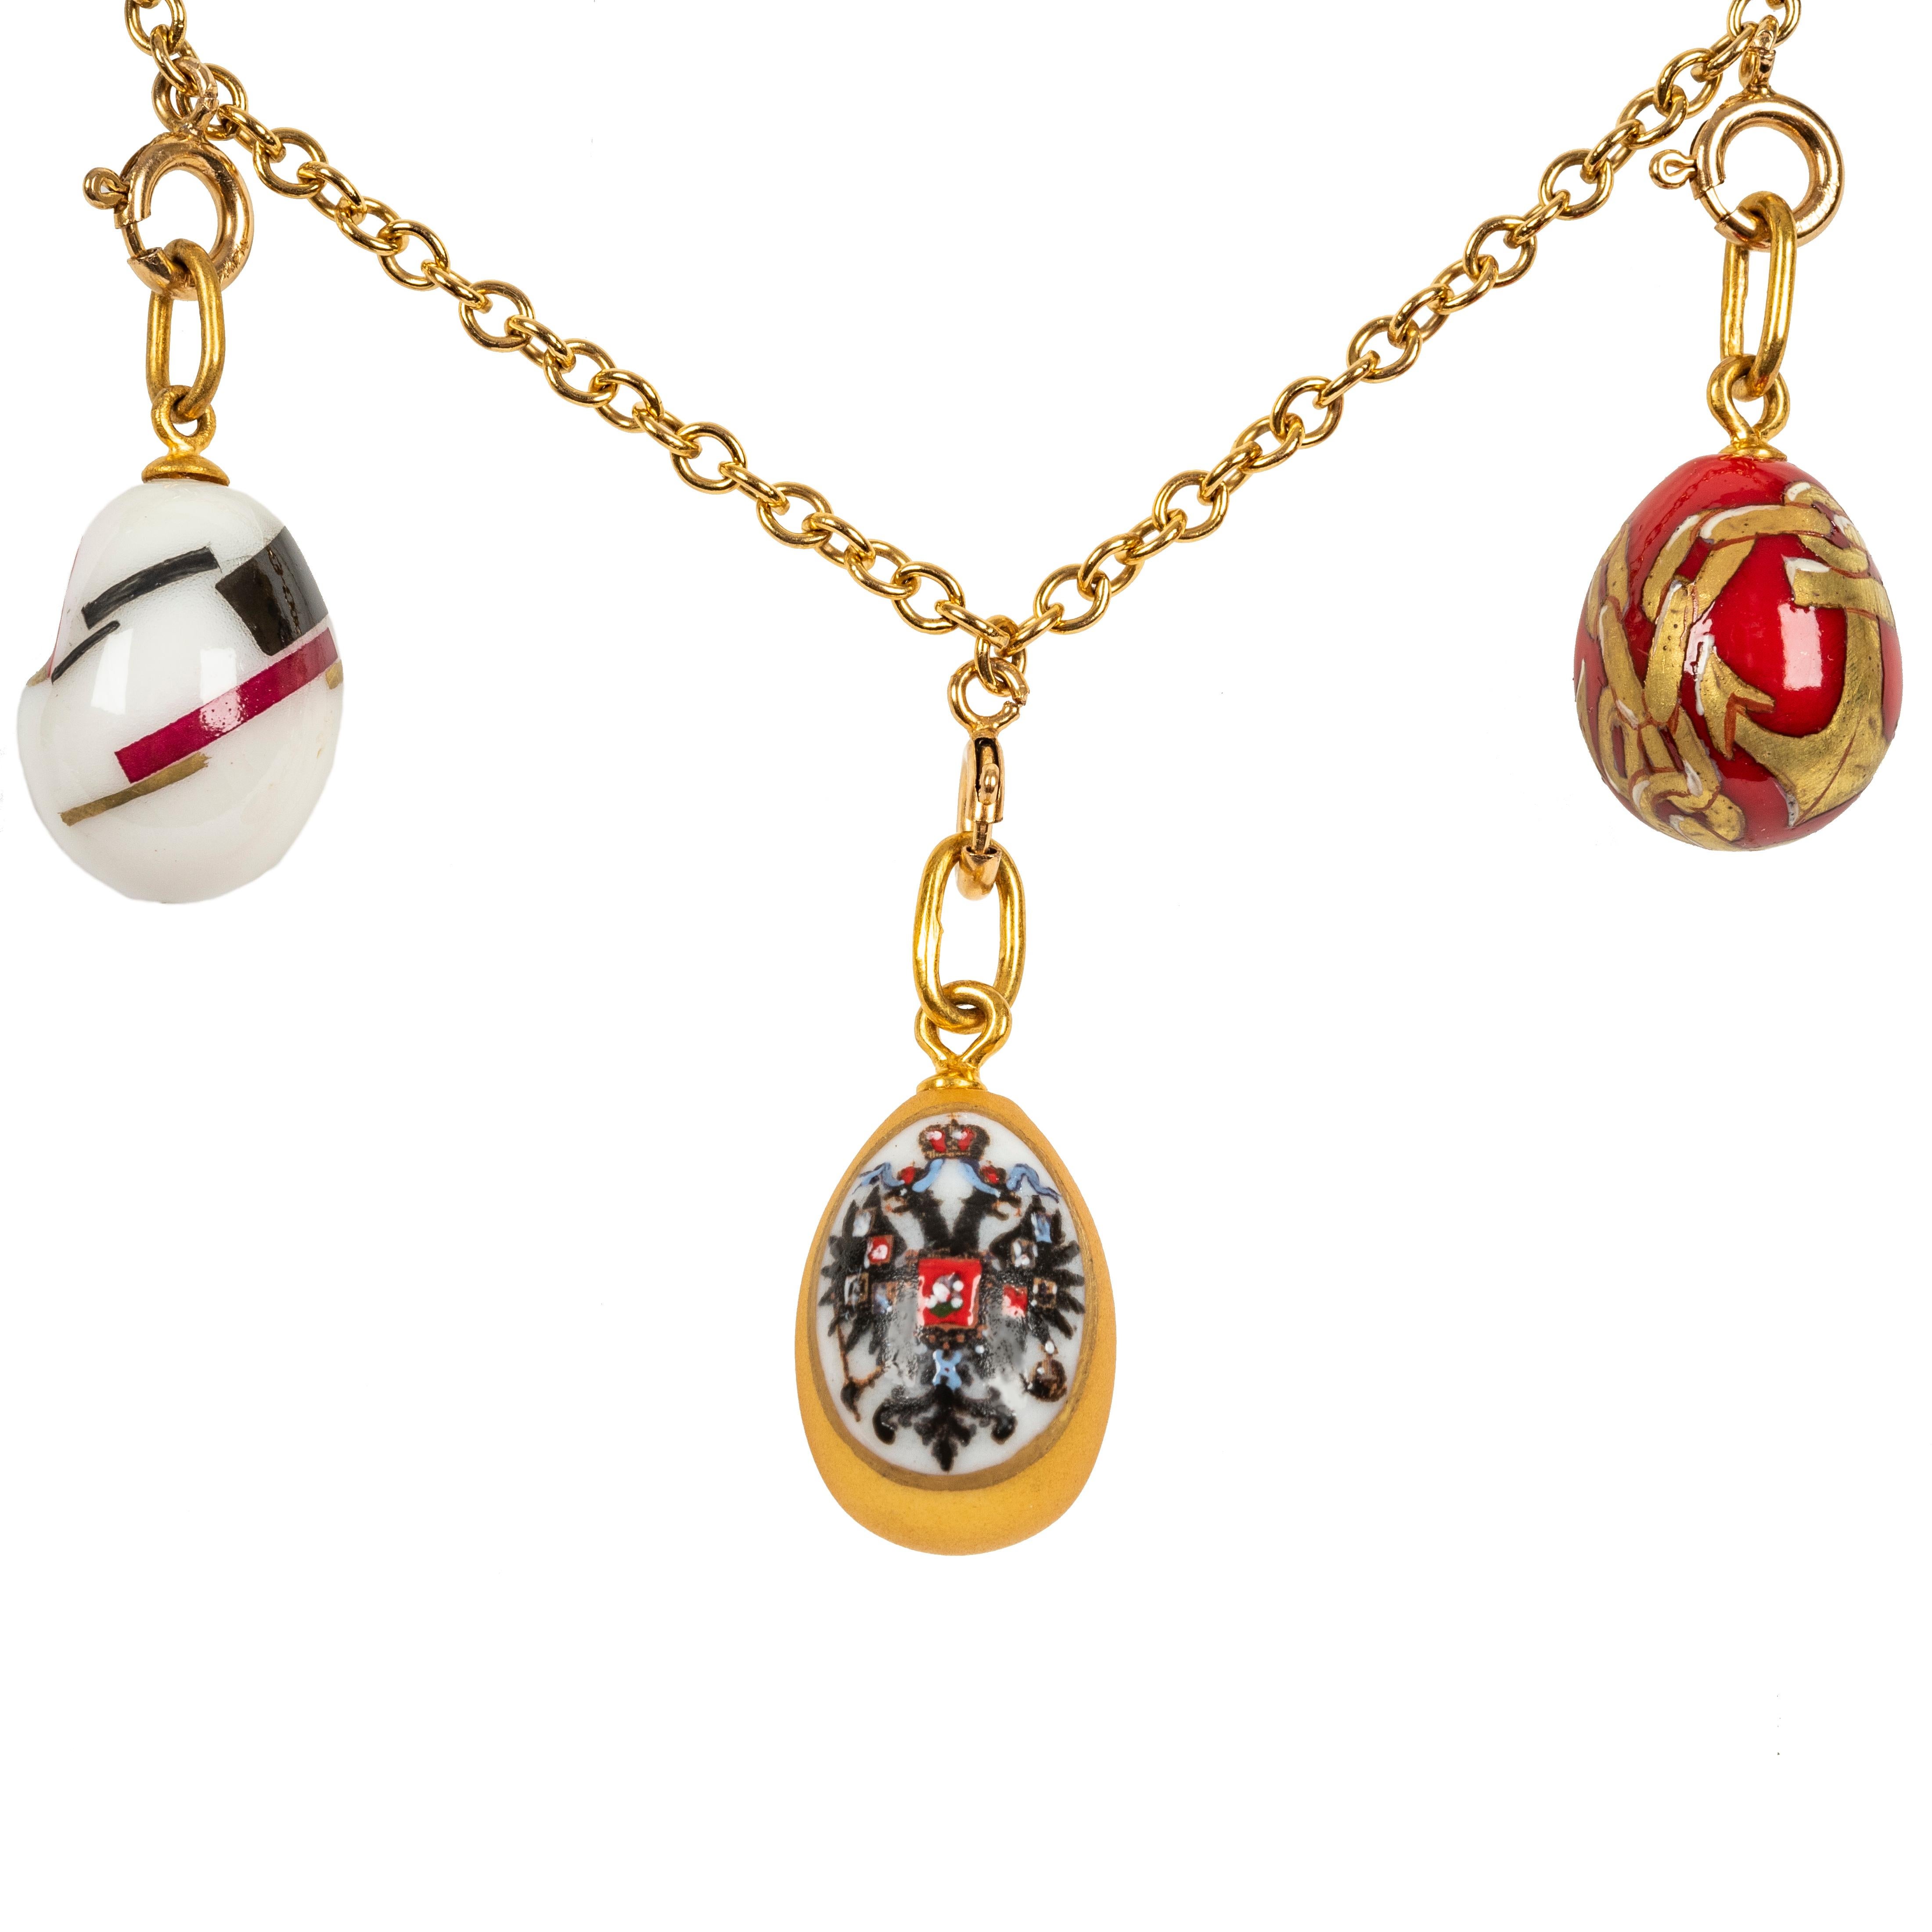 This beautiful Easter egg necklace is designed as a classic link chain suspending nine hand painted egg pendants from St. Petersburg, Russia. In colorful porcelain depicting a Romanov double-headed eagle-symbol of Imperial Russia, a pine cone in